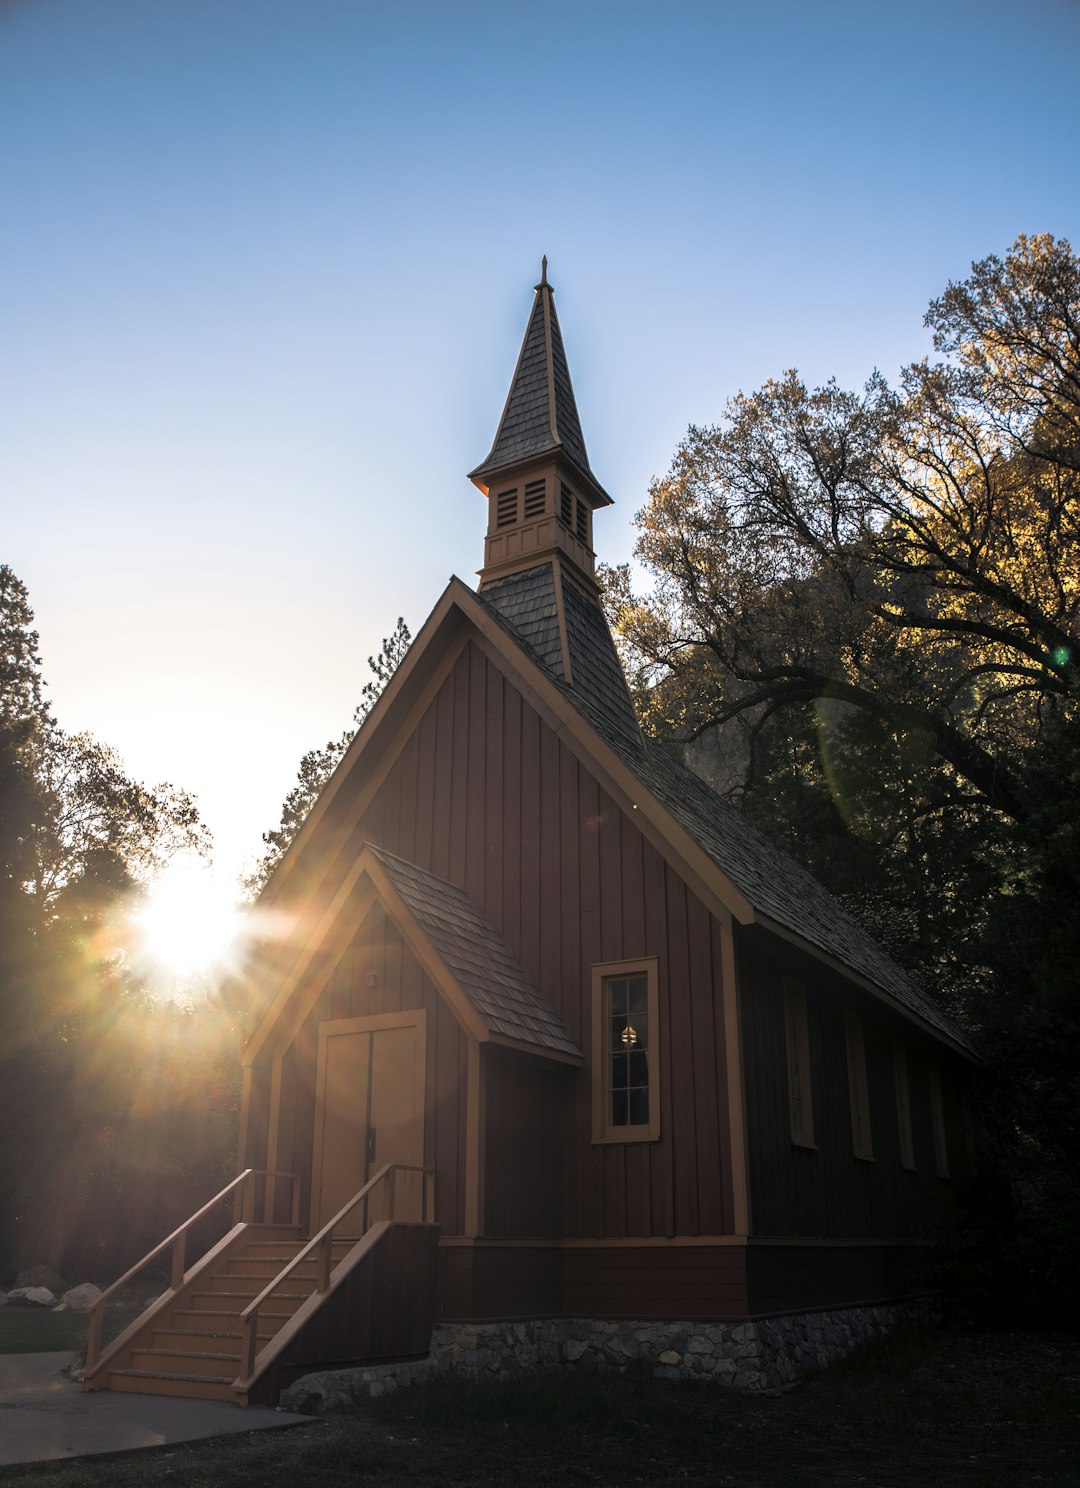 A small church building surrounded by trees, with the sunset in the background.